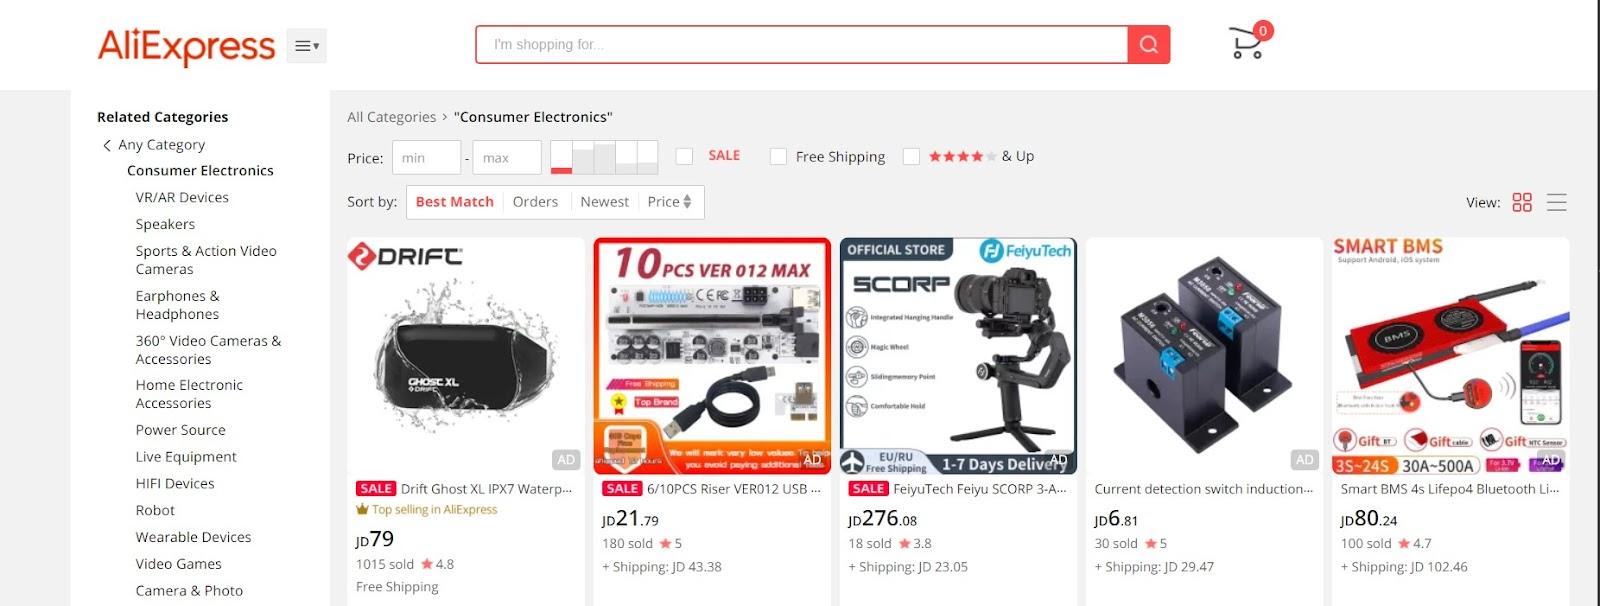 Get your AliExpress code to shop at AliExpress UAE, KSA and more.